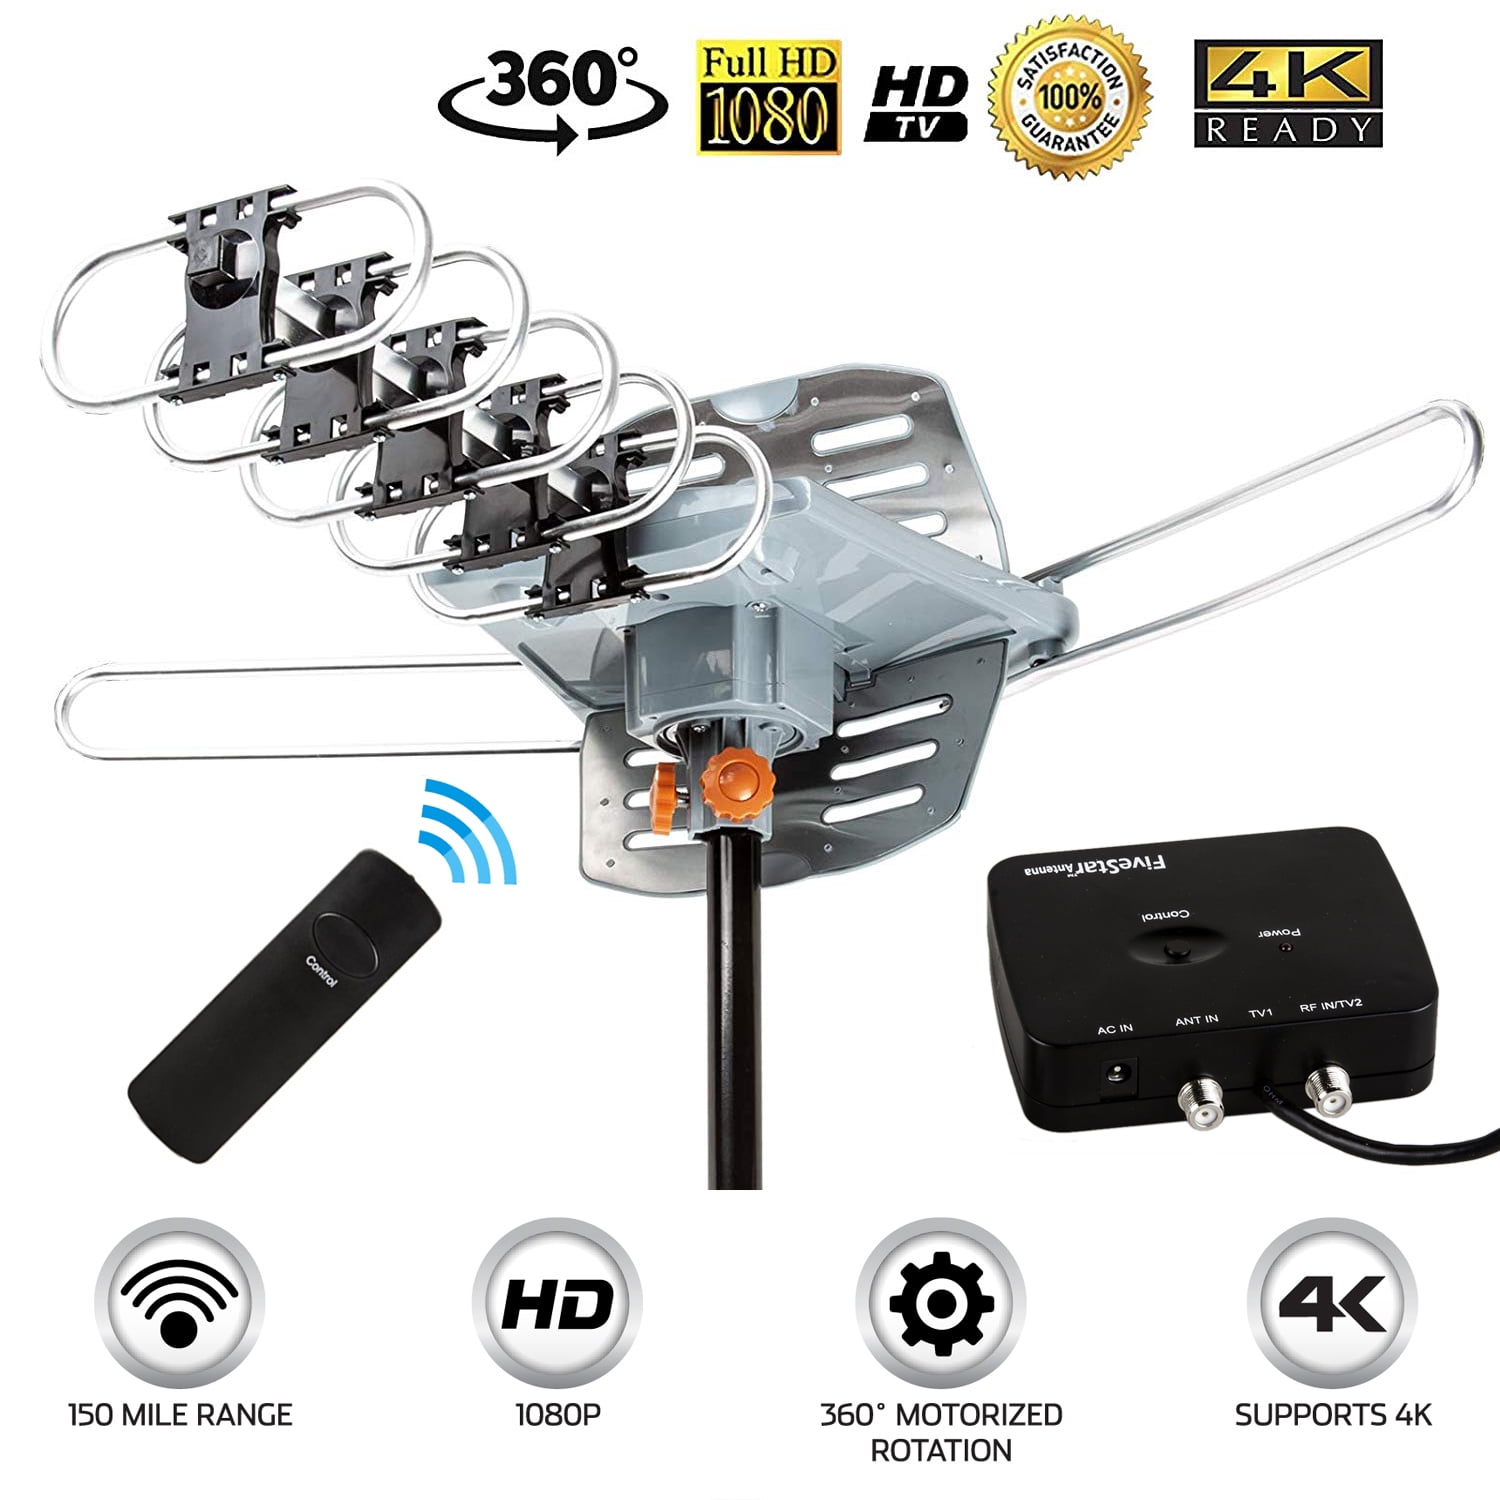 UHF/VHF 4K 1080P Channels with Mount Pole 150 Mile Range 40FT Coax Cable Motorized 360° Rotation Leadzm Outdoor Amplified Digital HDTV Antenna Wireless Remote Control 